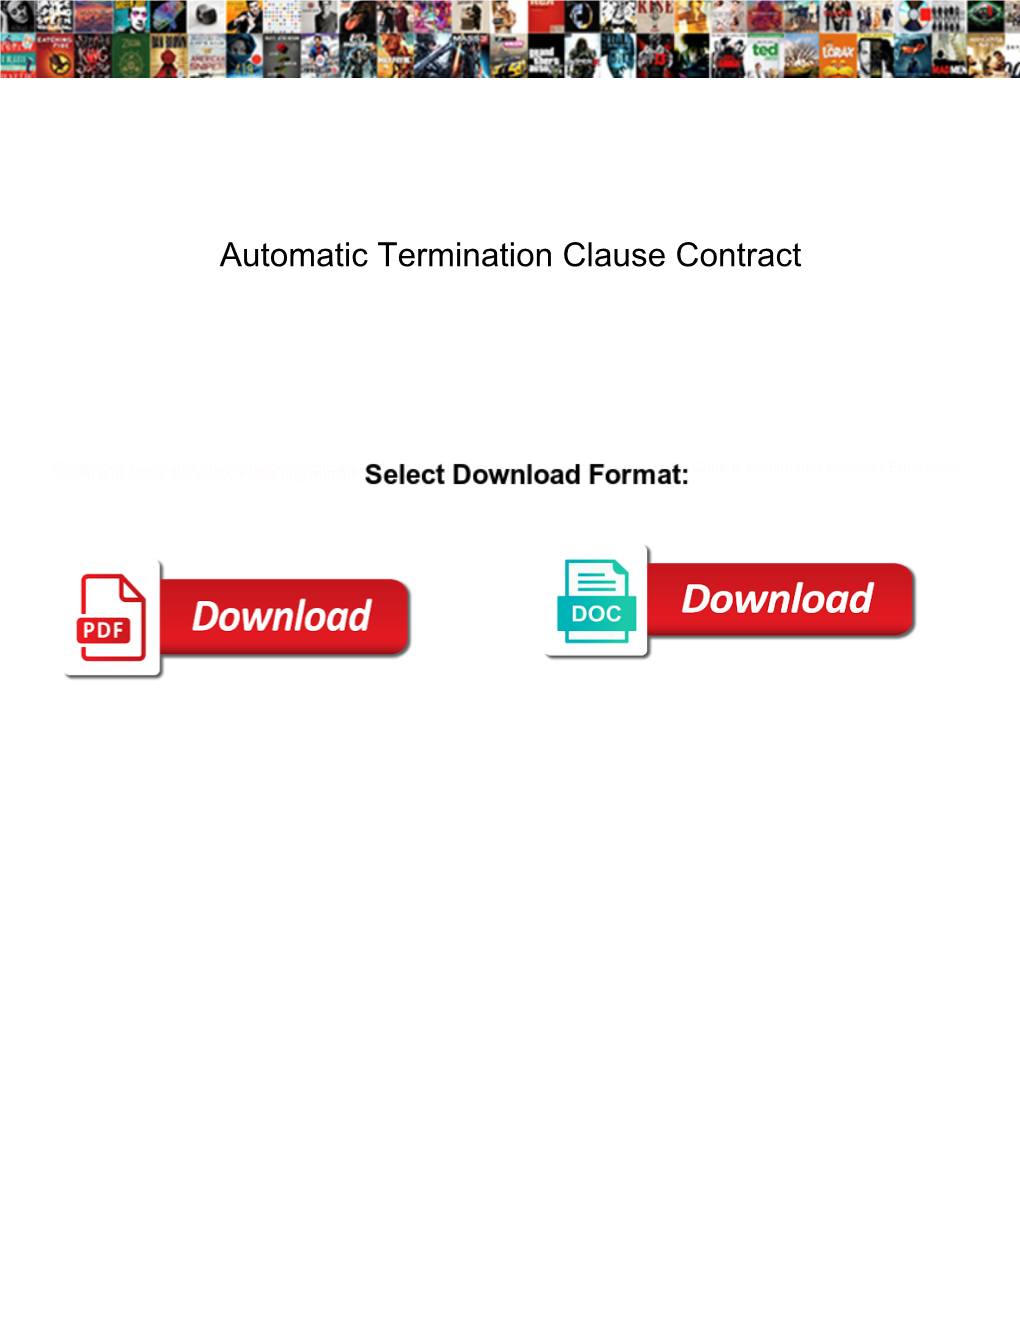 Automatic Termination Clause Contract